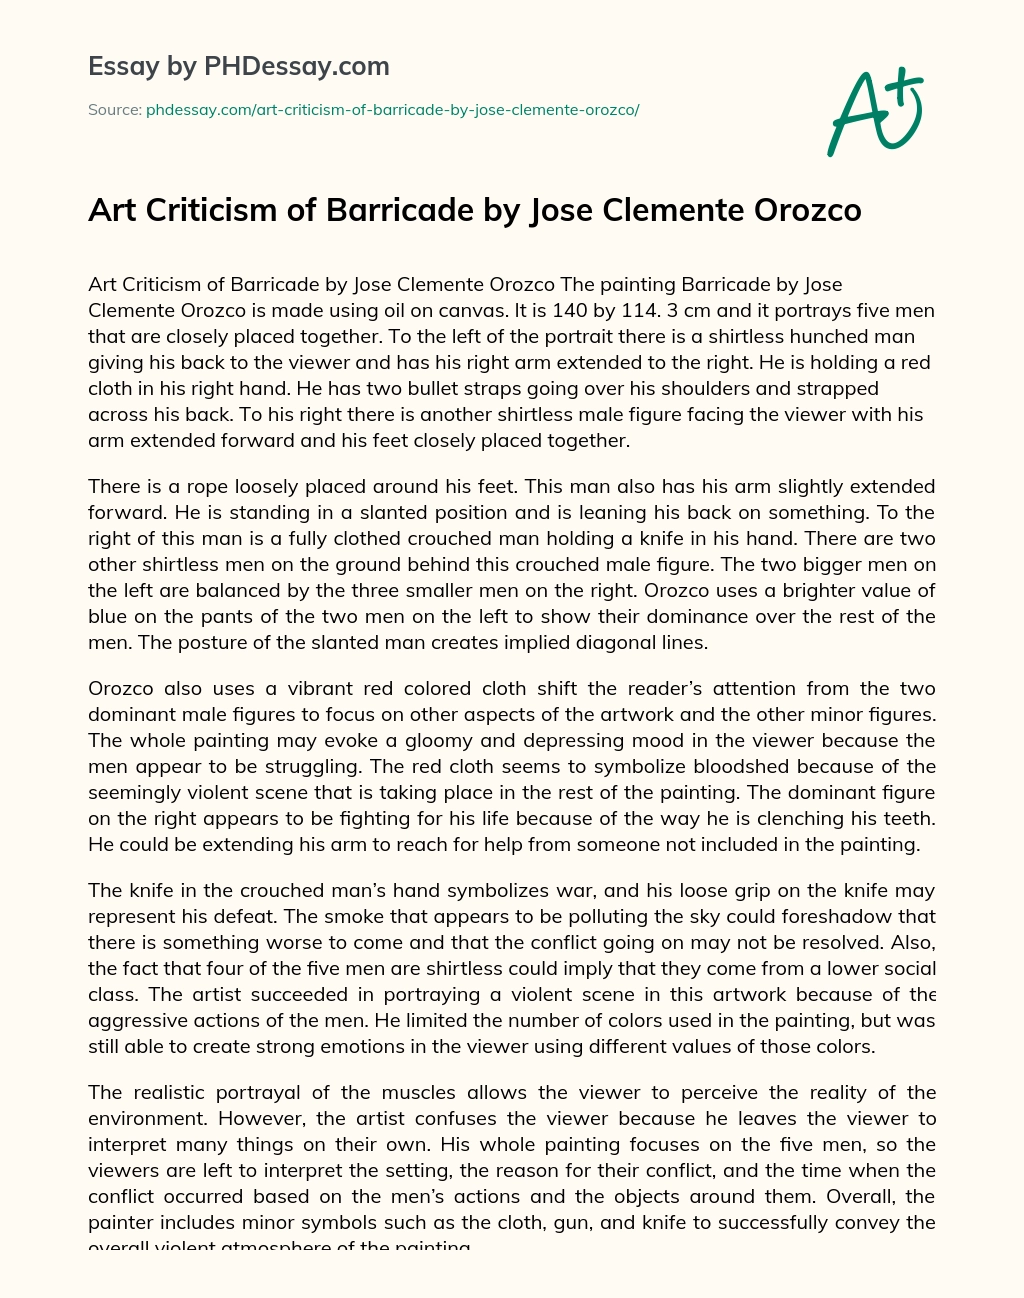 Art Criticism of Barricade by Jose Clemente Orozco essay